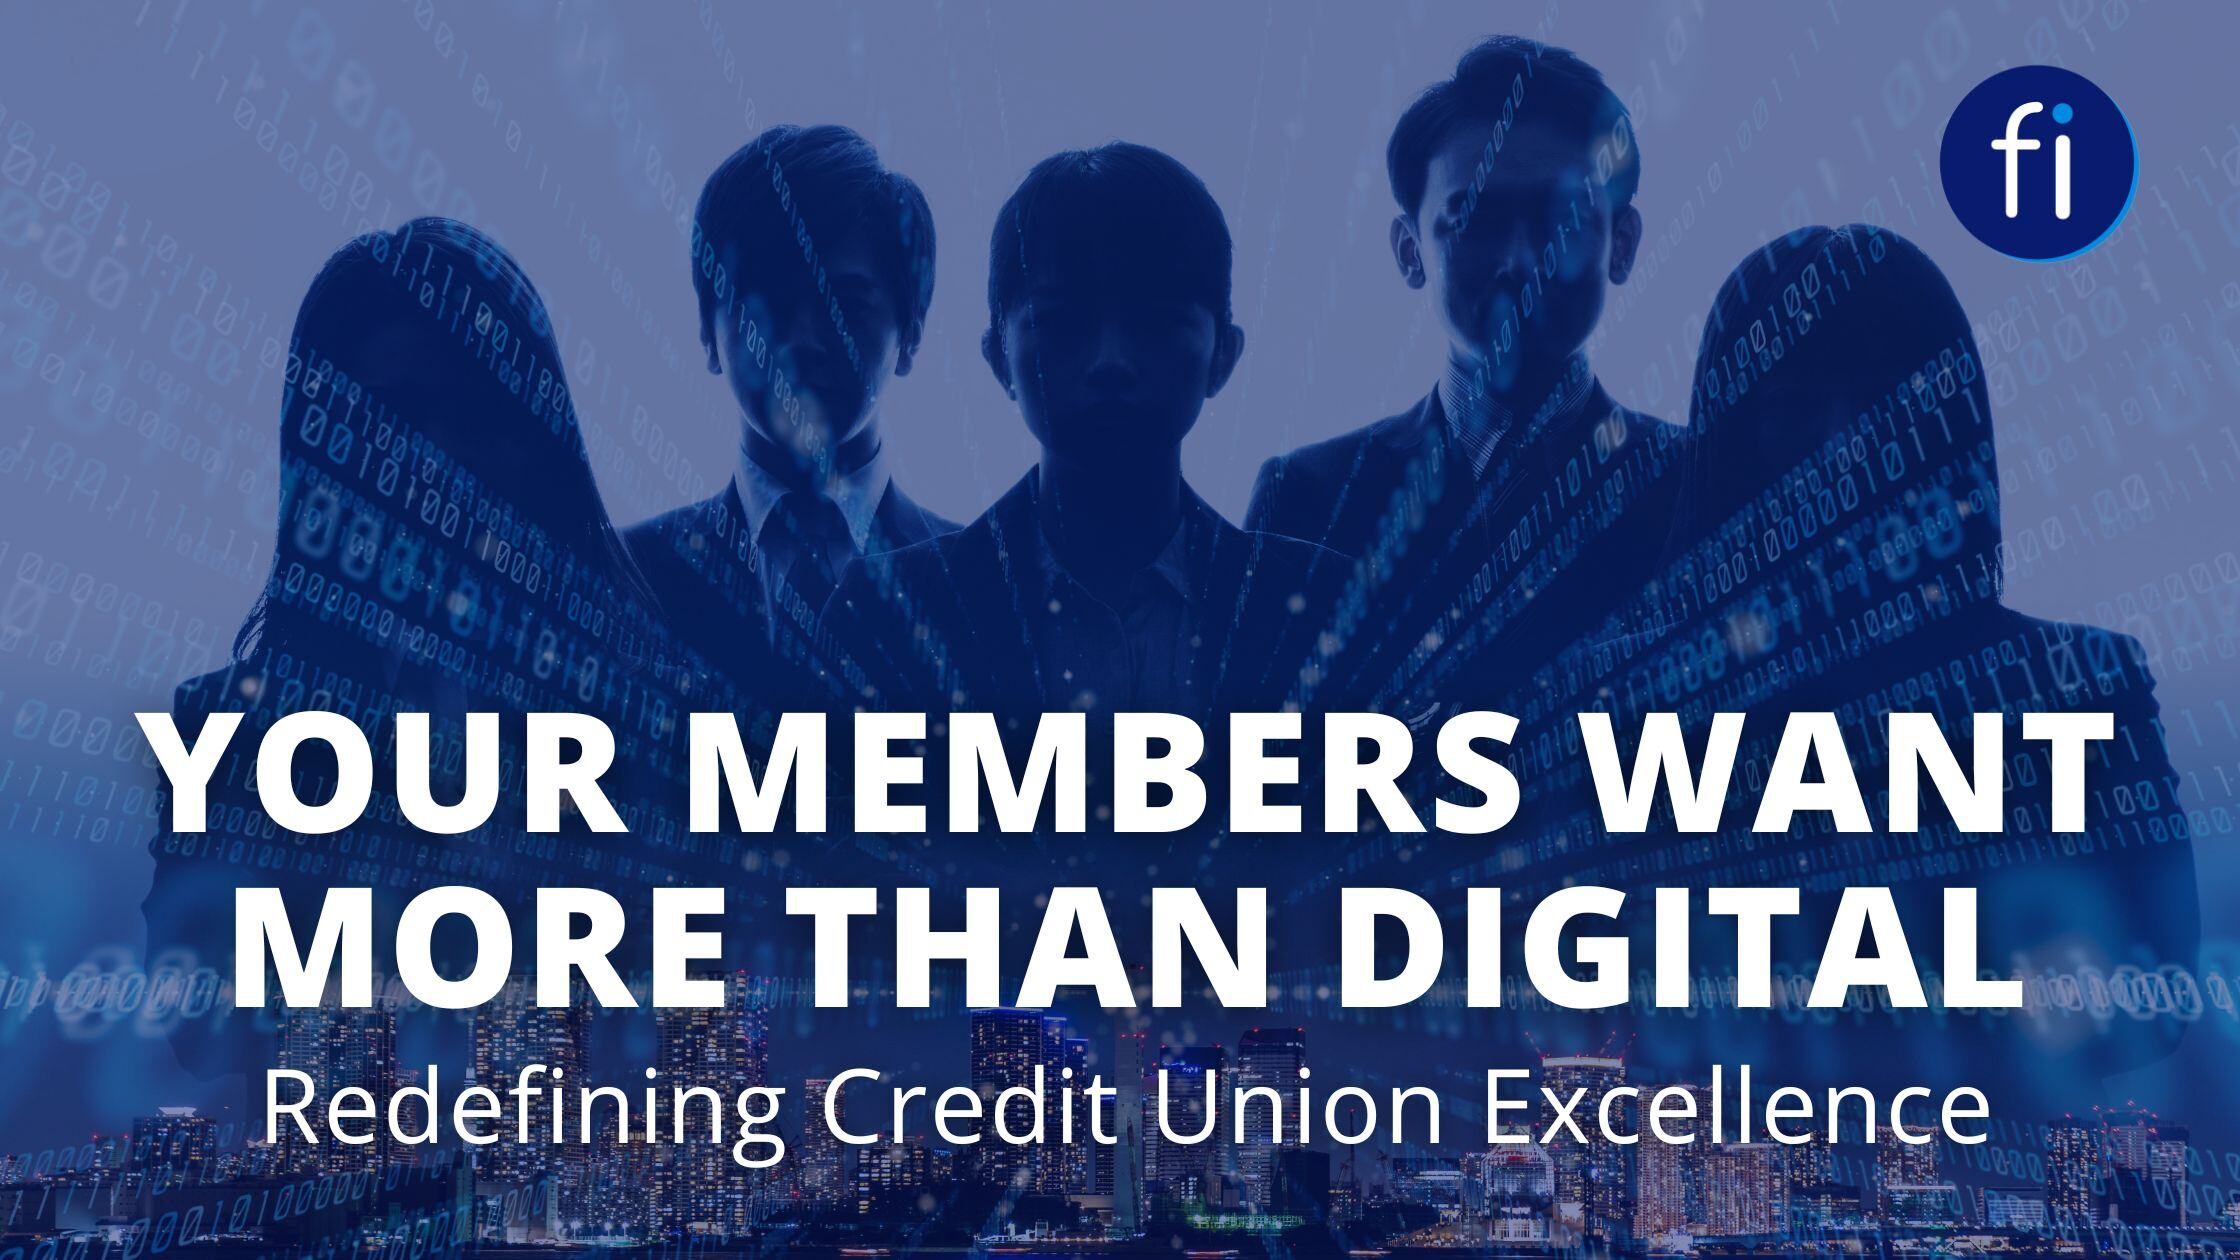 Your Members Want More Than Digital: Redefining Credit Union Excellence